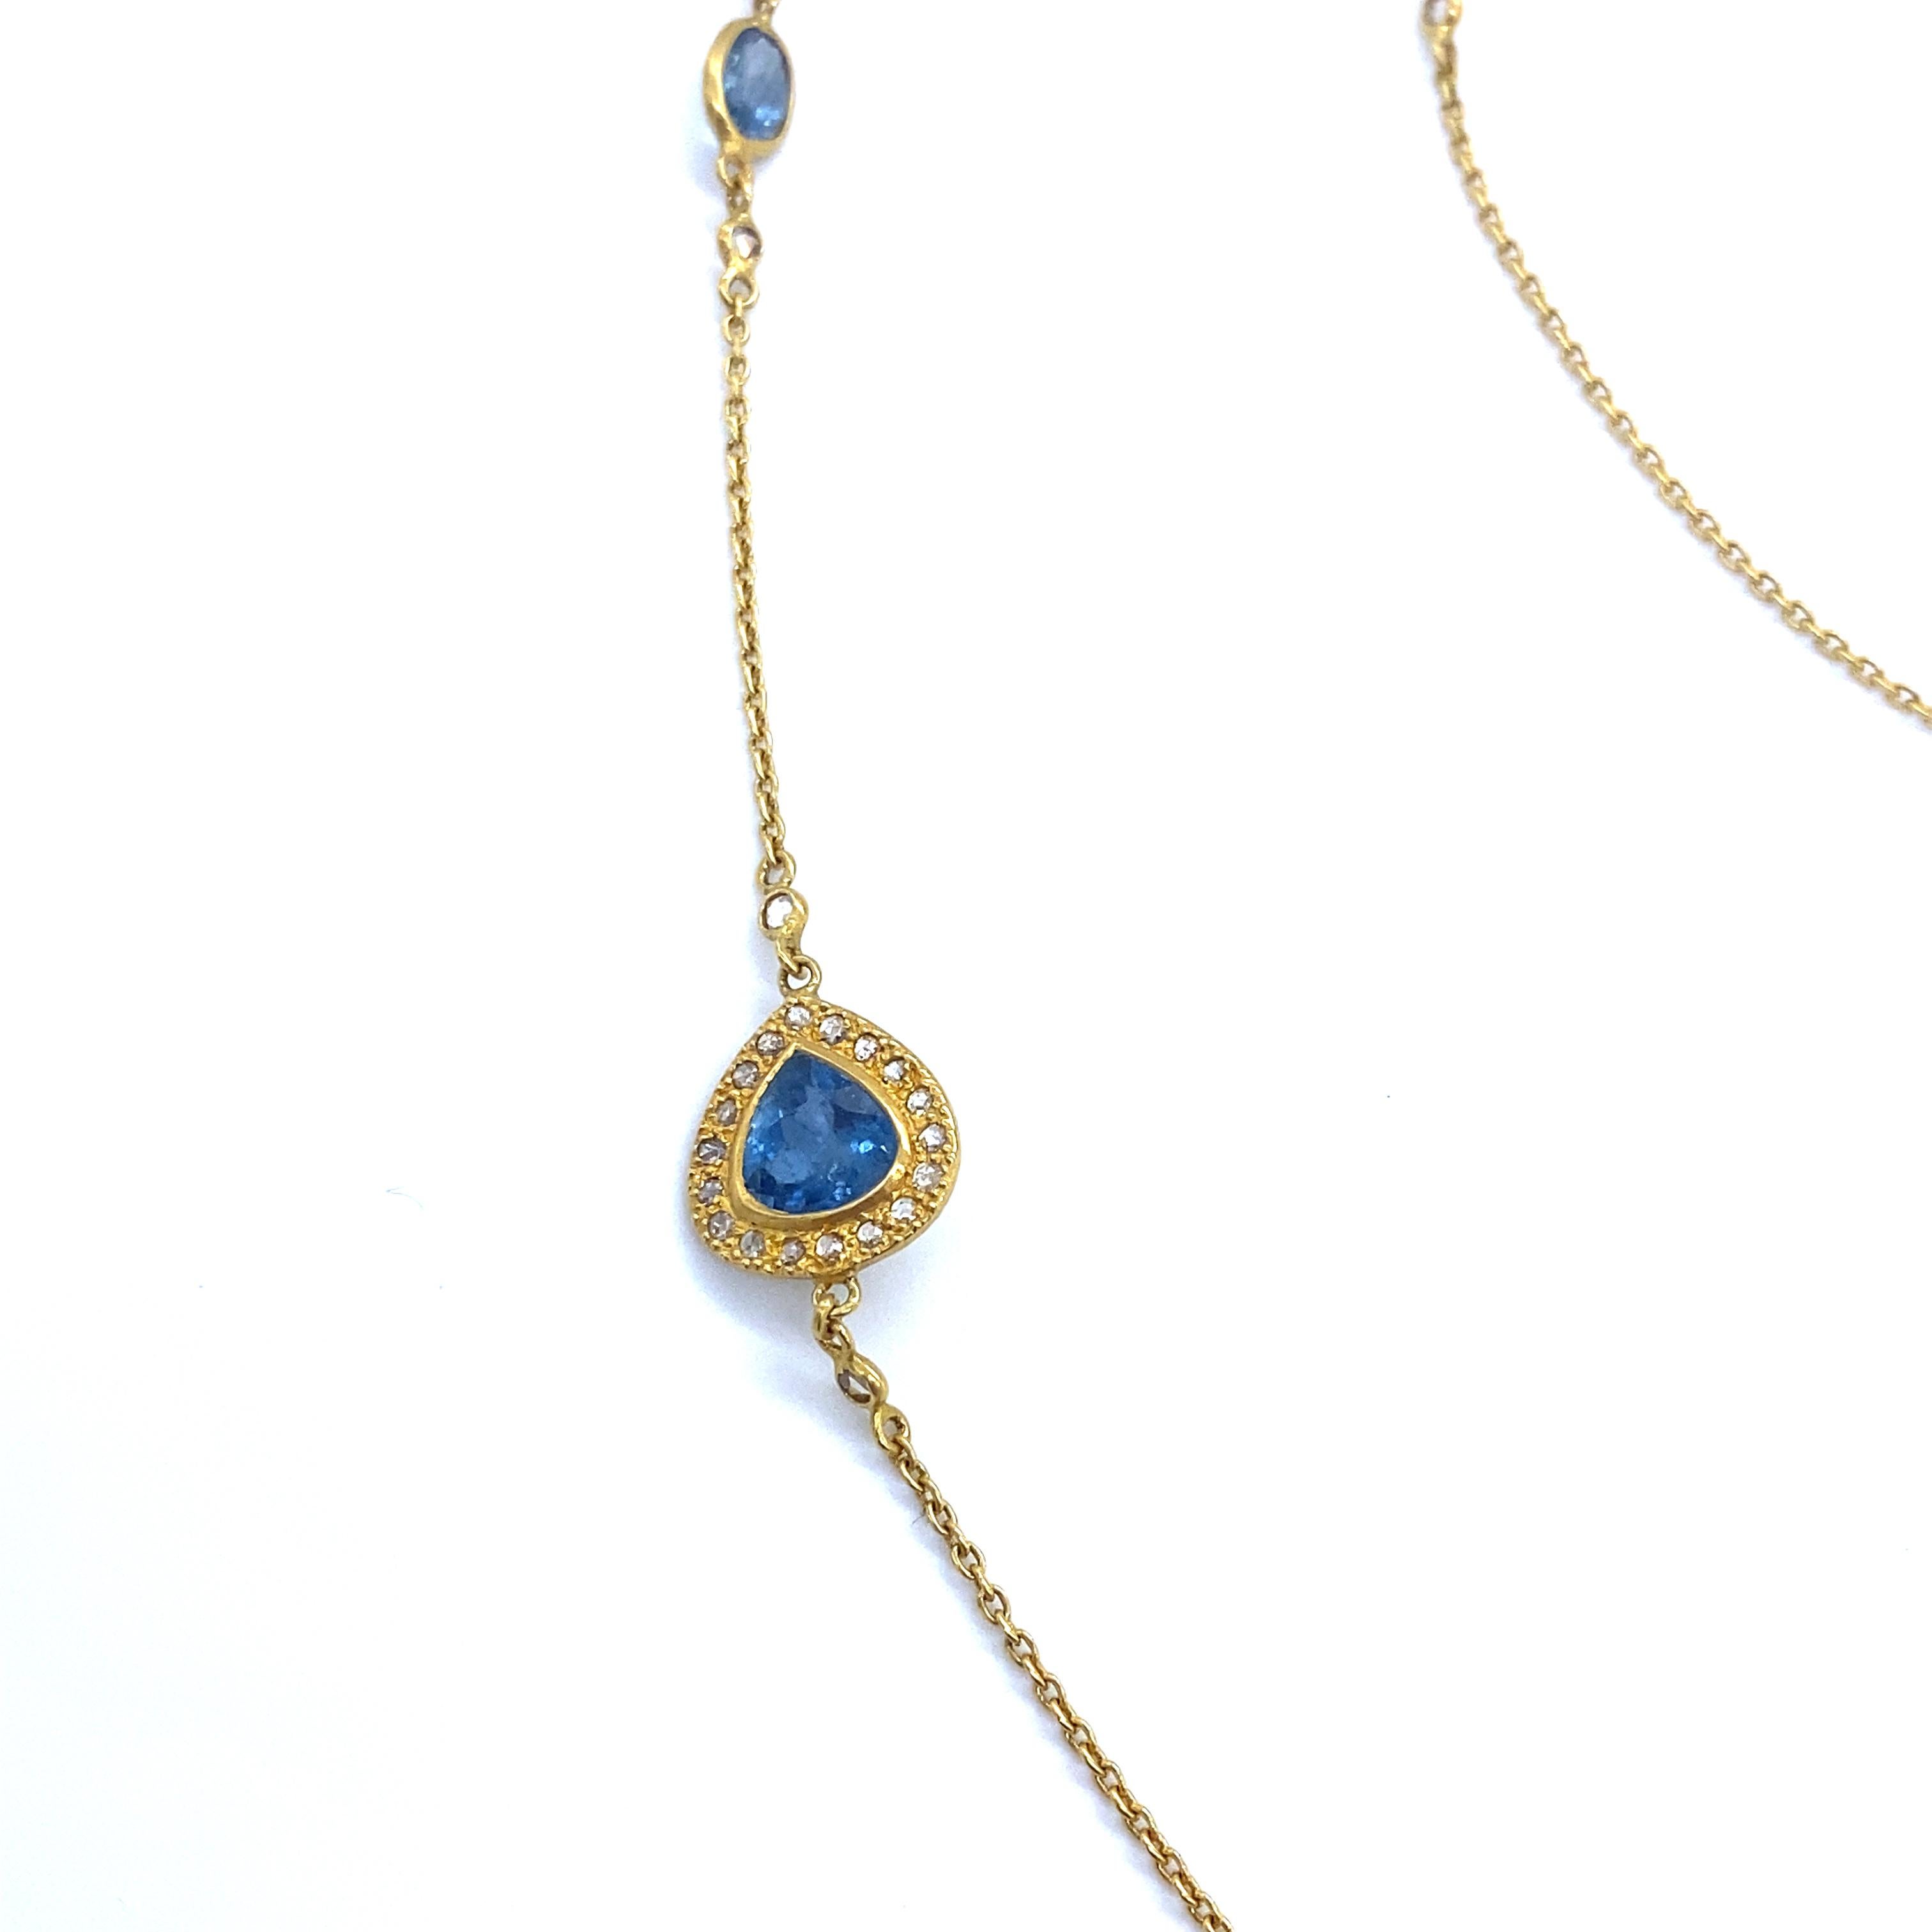 Affinity Aquamarine and Diamond Necklace Set In 20 Karat Yellow Gold With 12.70 Carat Aquamarine and 1.08 Carat Diamonds. The Necklace Is Finely Crafted With Aquamarine On A Yellow Gold Chain. The Necklace Is 36 Inches Long.